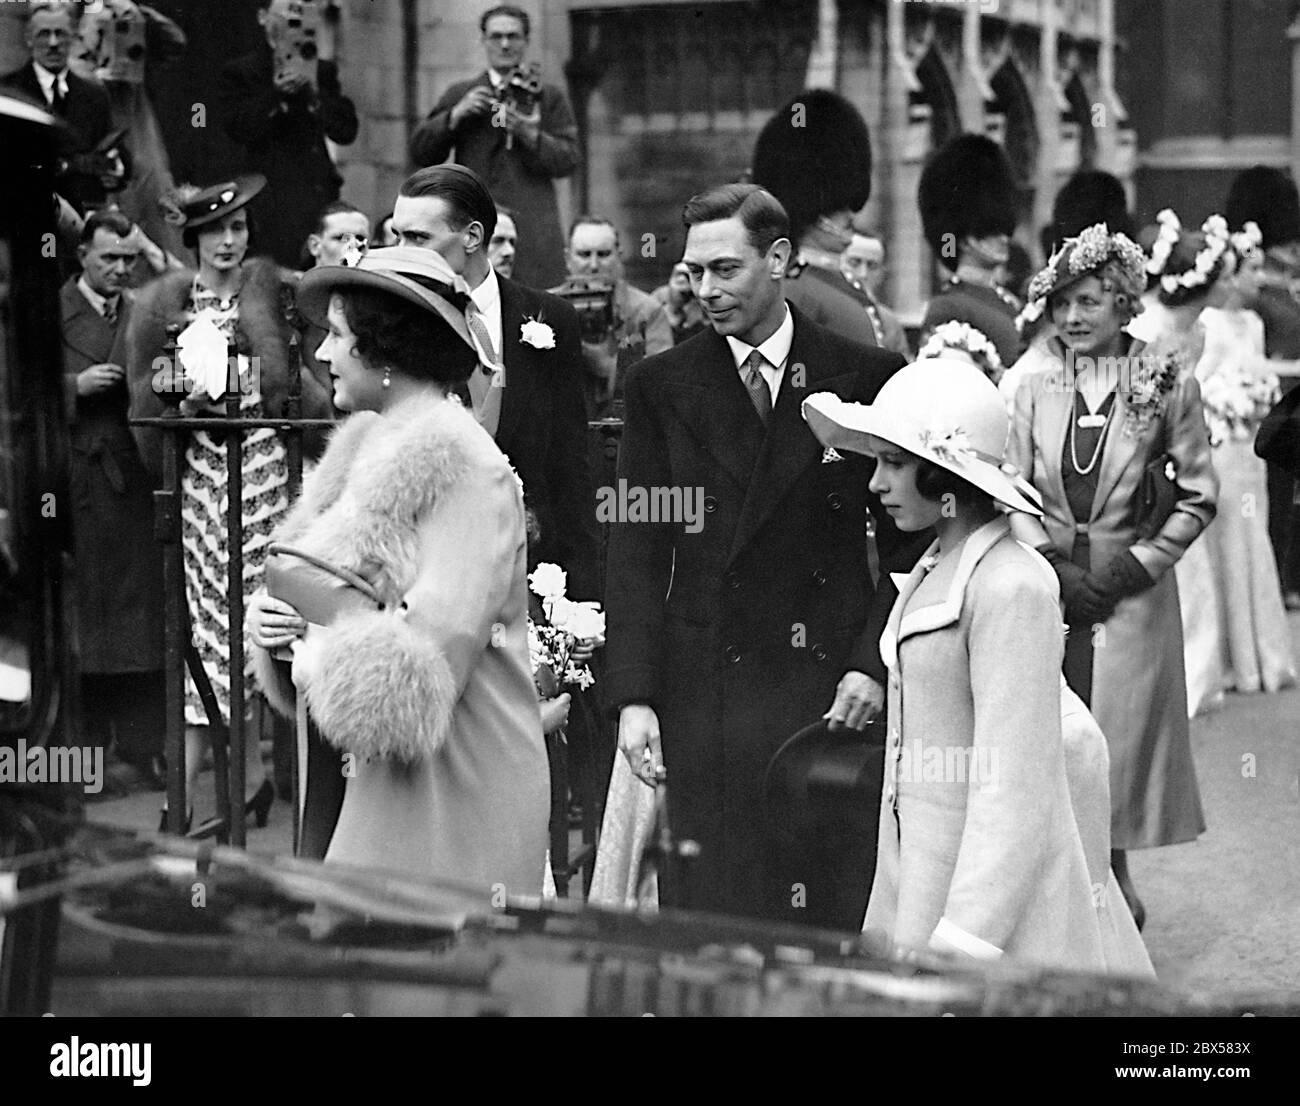 Elizabeth II with Queen Elizabeth (front) and Princess Margaret Rose (hidden) on their way to the wedding of Princess Anne of Denmark, the niece of Queen Elizabeth, and Lord Thomas Anson, 4th Earl of Liechtenstein. Stock Photo